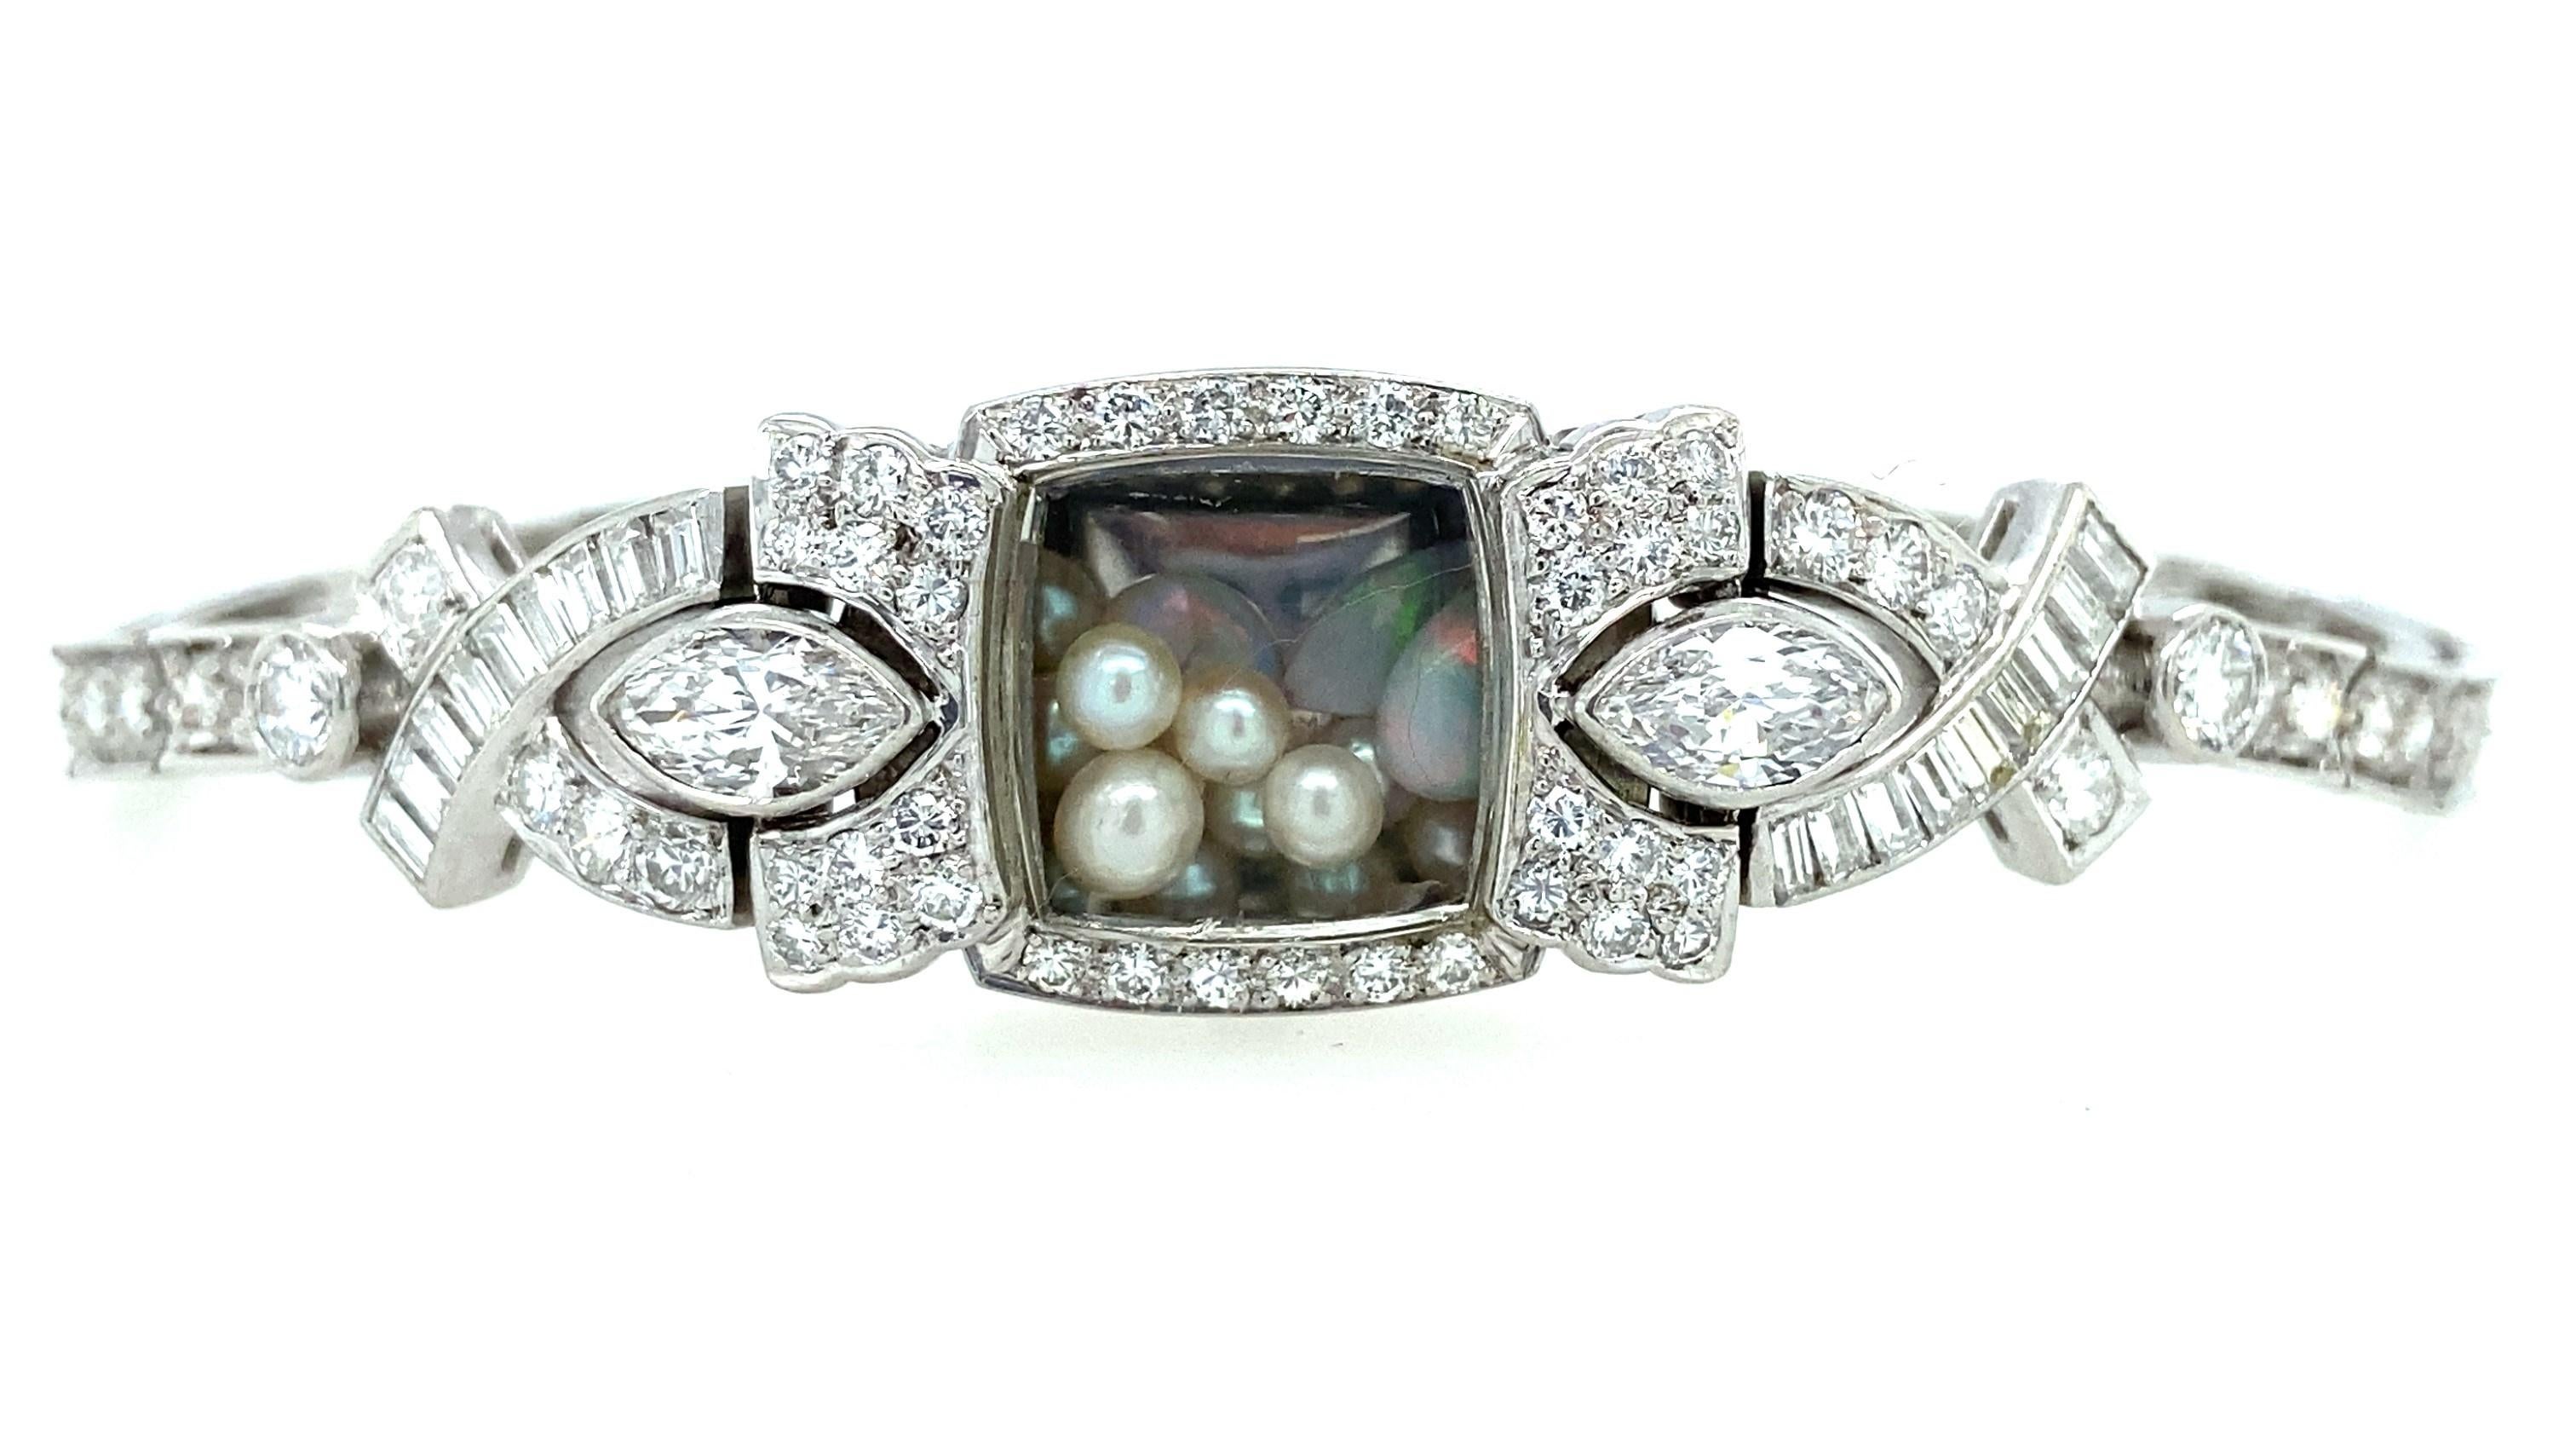 This stunning 1950s diamond bracelet is absolutely one of a kind! Once a woman's watch with a tiny face that was impossible to read, we have removed the movement and replaced it with tiny pearls and 1.09ct of opals that shake and move around like a